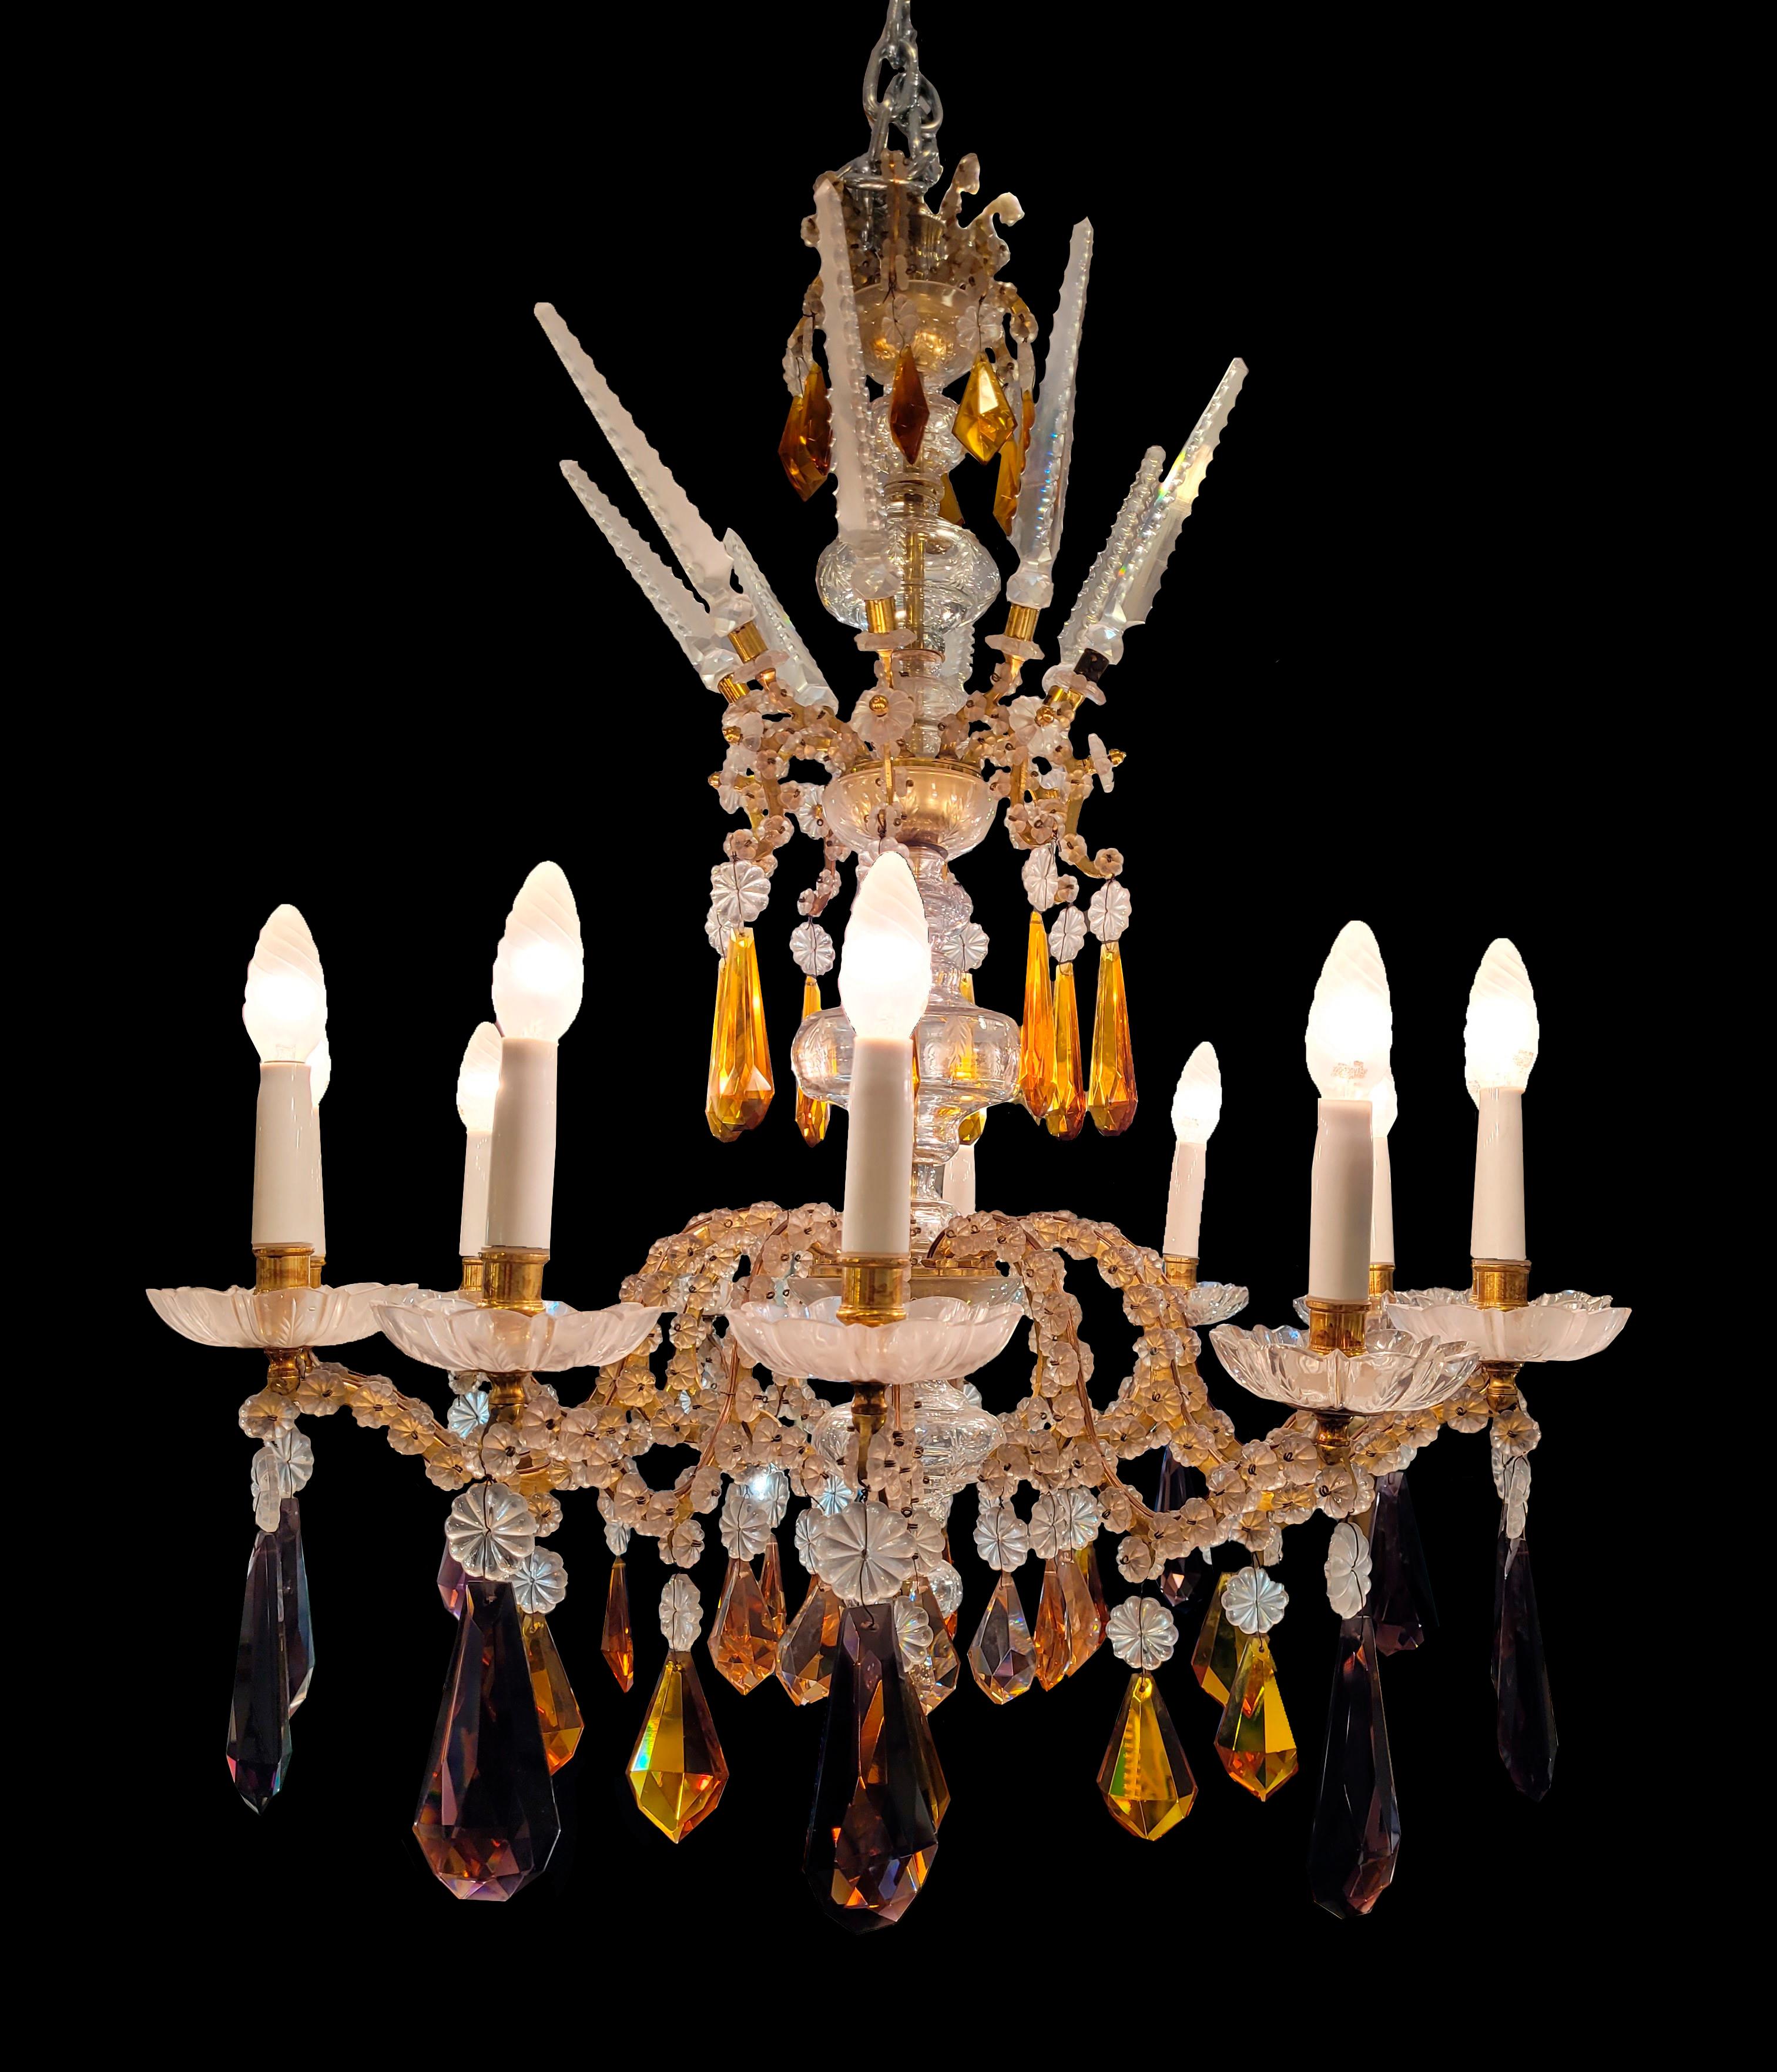 One of a Kind  Italian chandelier in cut and faceted crystal.
Configured in 12 glass arms full of cut glass daisies. Shaft with division into different bulbs with the interior in a bronze stem.
Full of teardrop-shaped faceted cystal pandelocas in